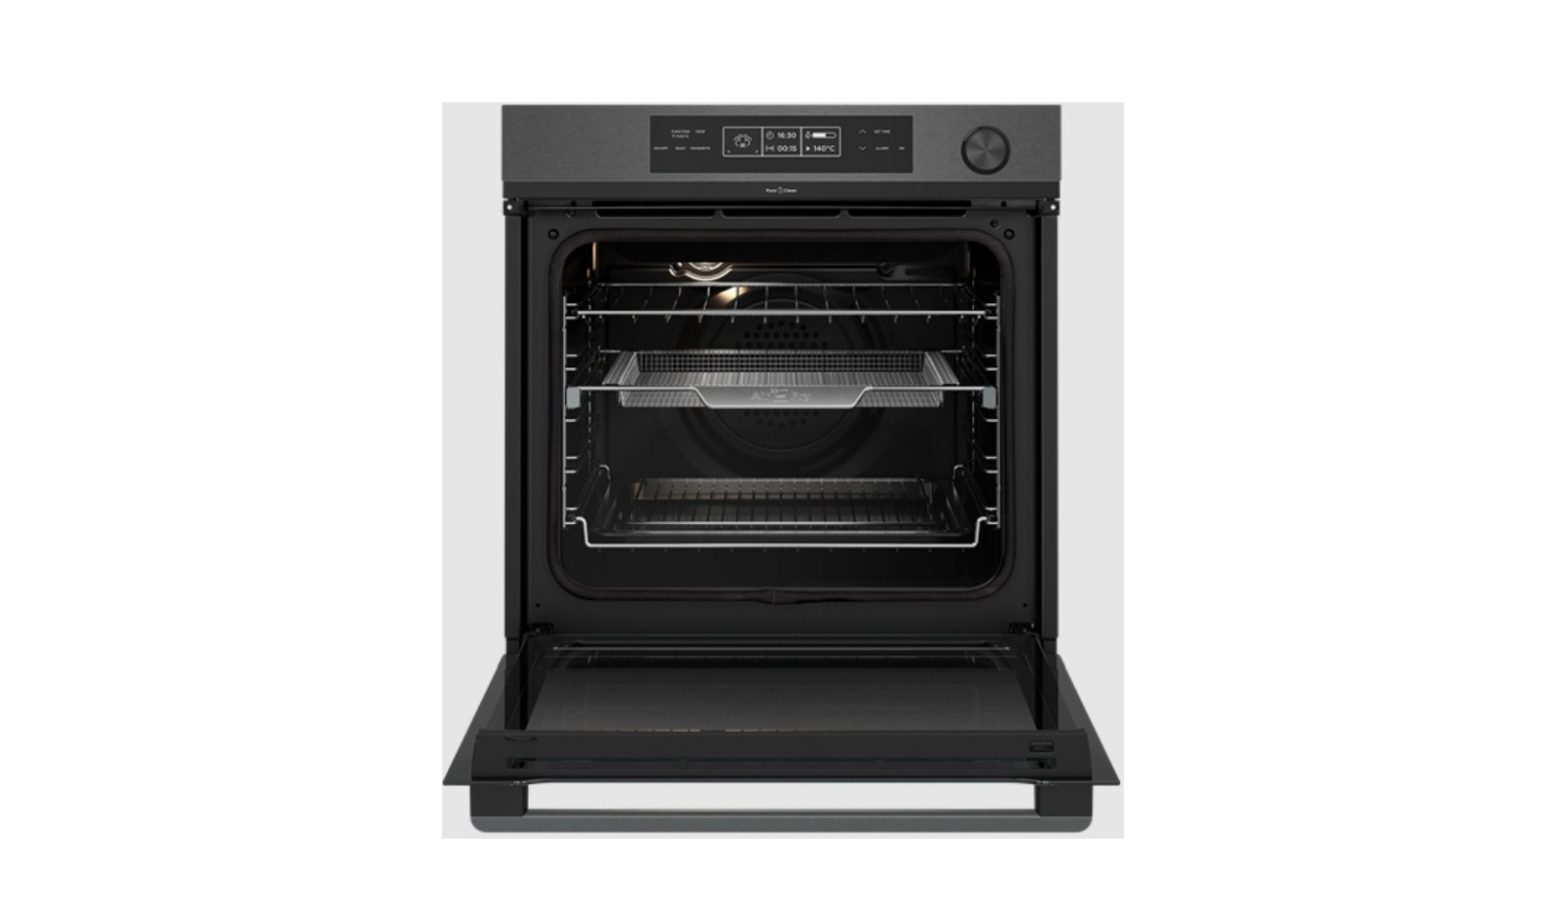 Westinghouse WVEP618 60cm Multi-Function 14 Pyrolytic Oven User Guide